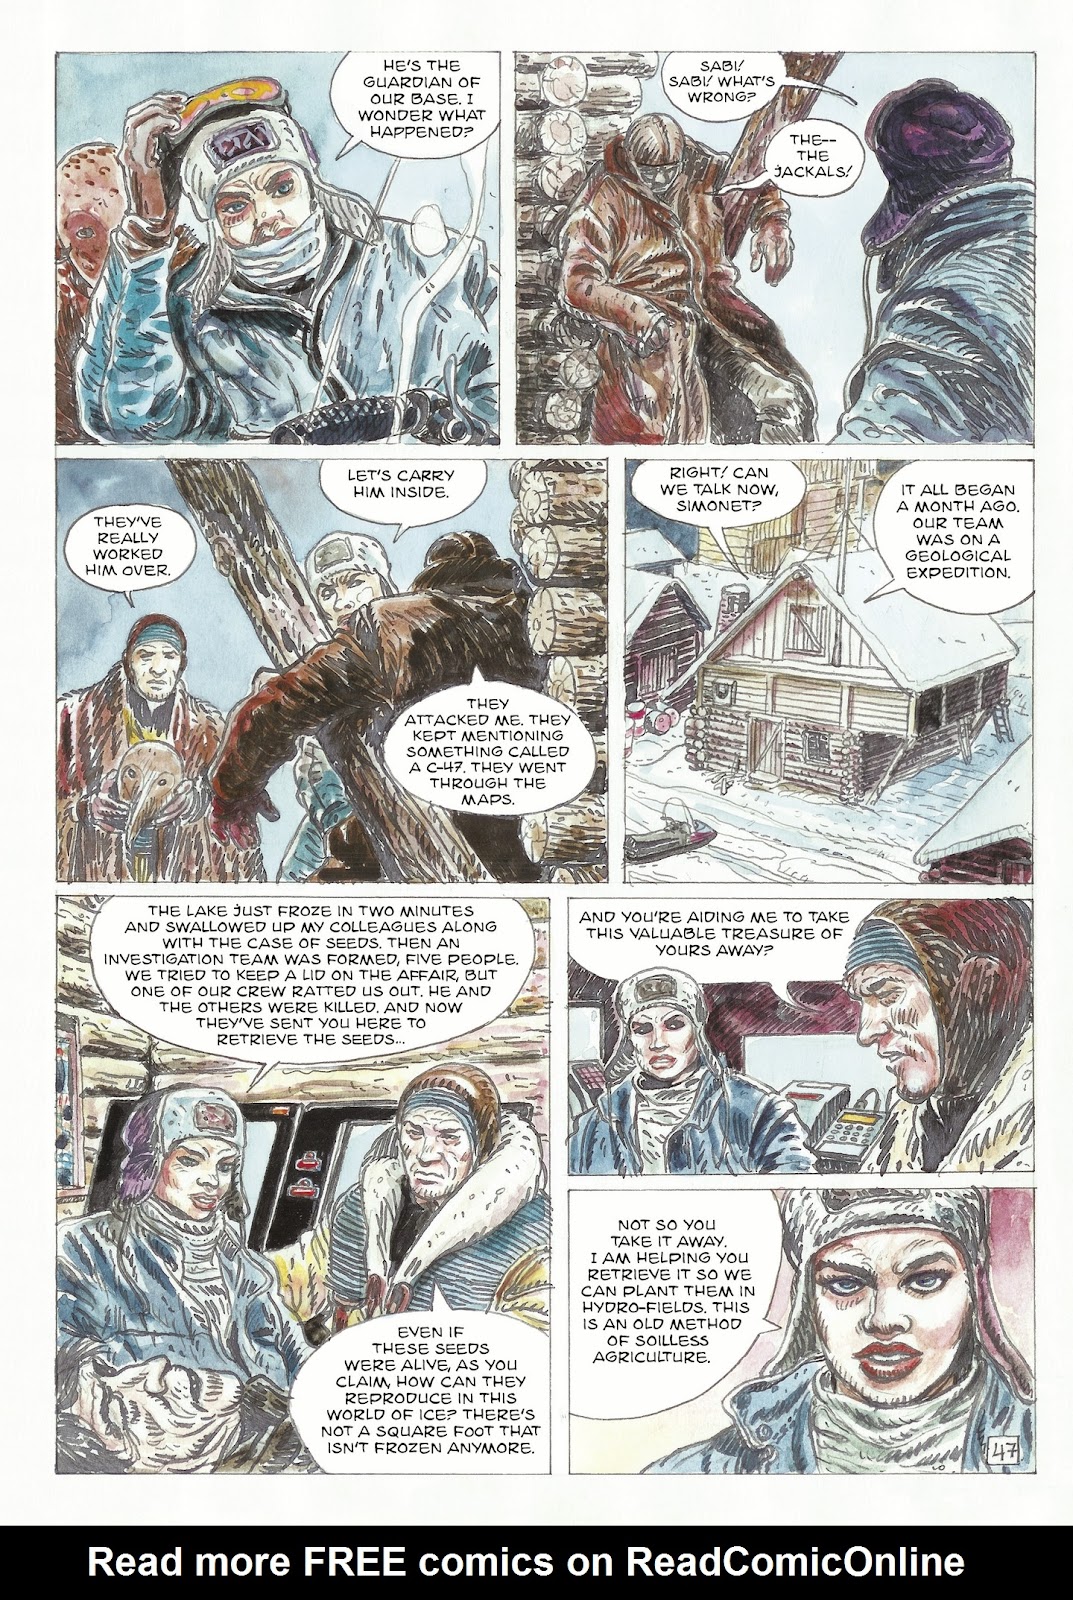 The Man With the Bear issue 1 - Page 49